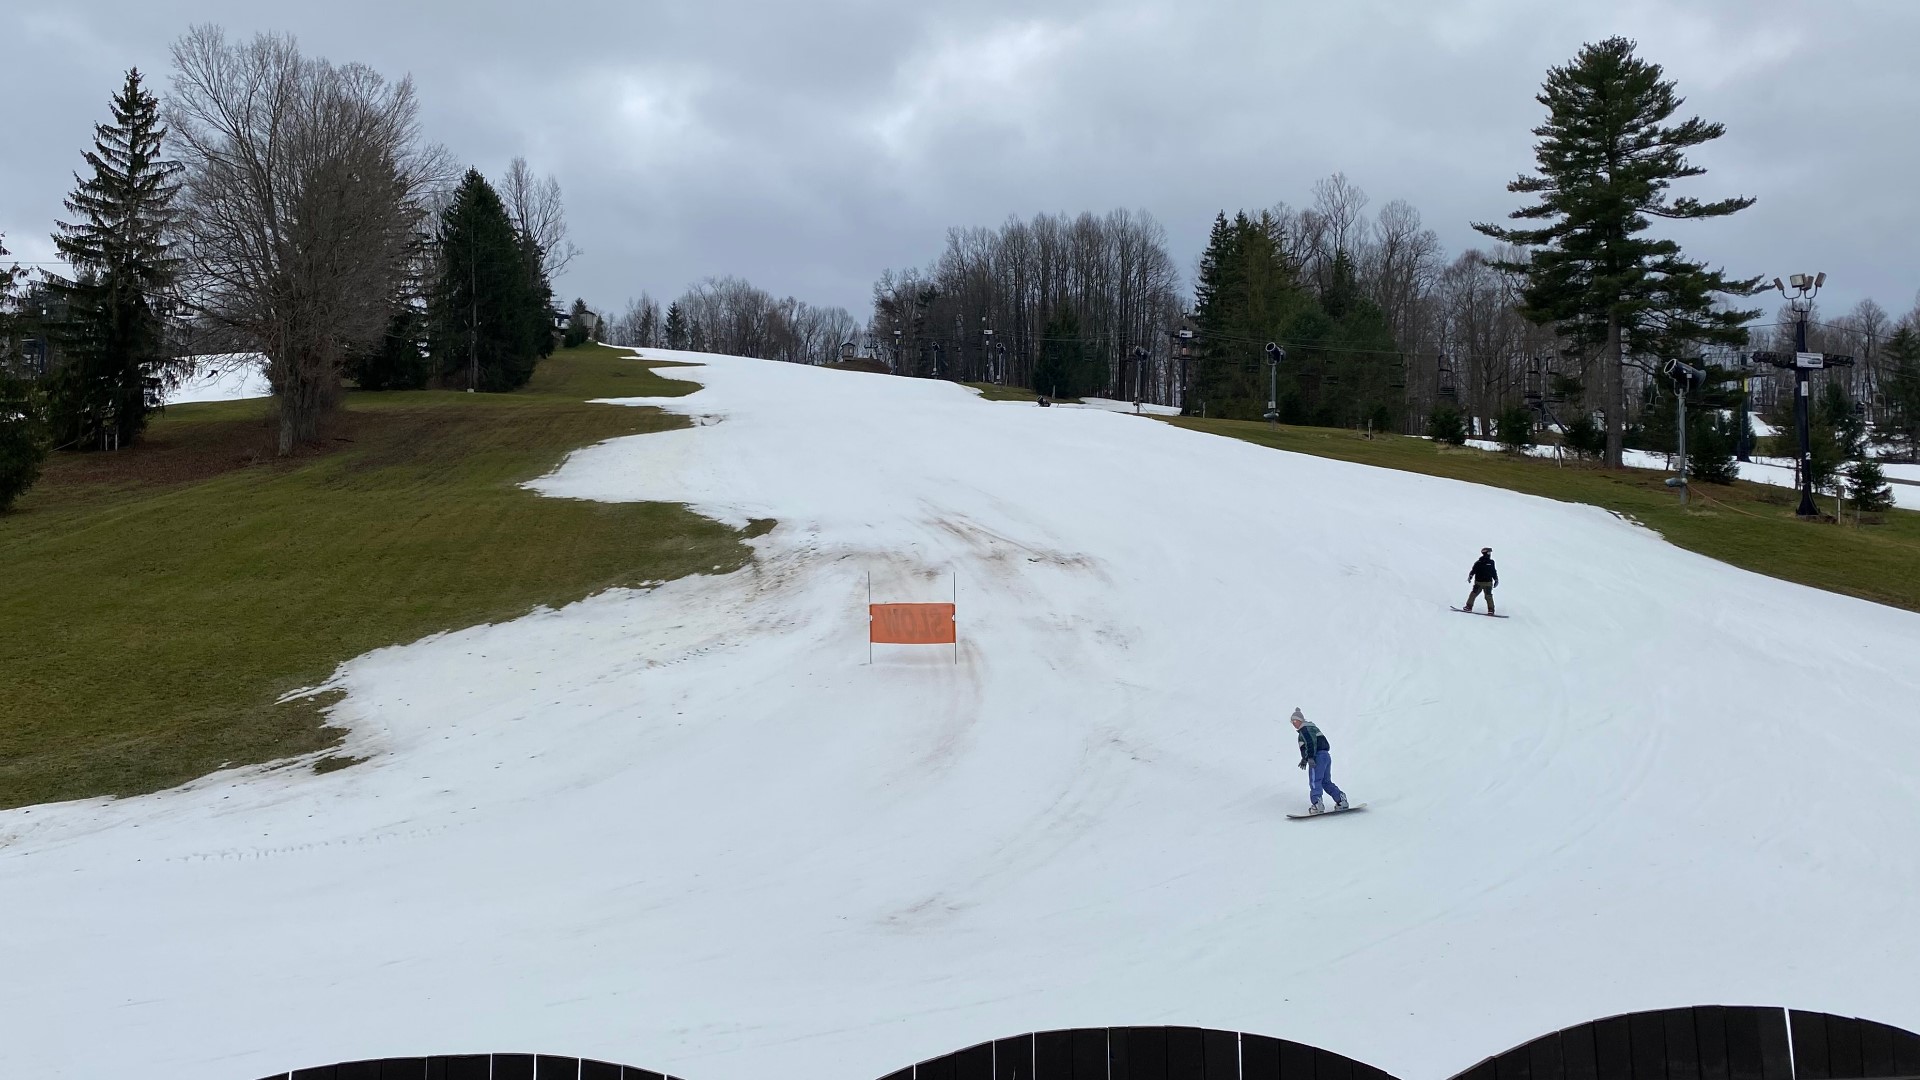 Unfavorable snow-making conditions have closed most Ohio ski resorts.